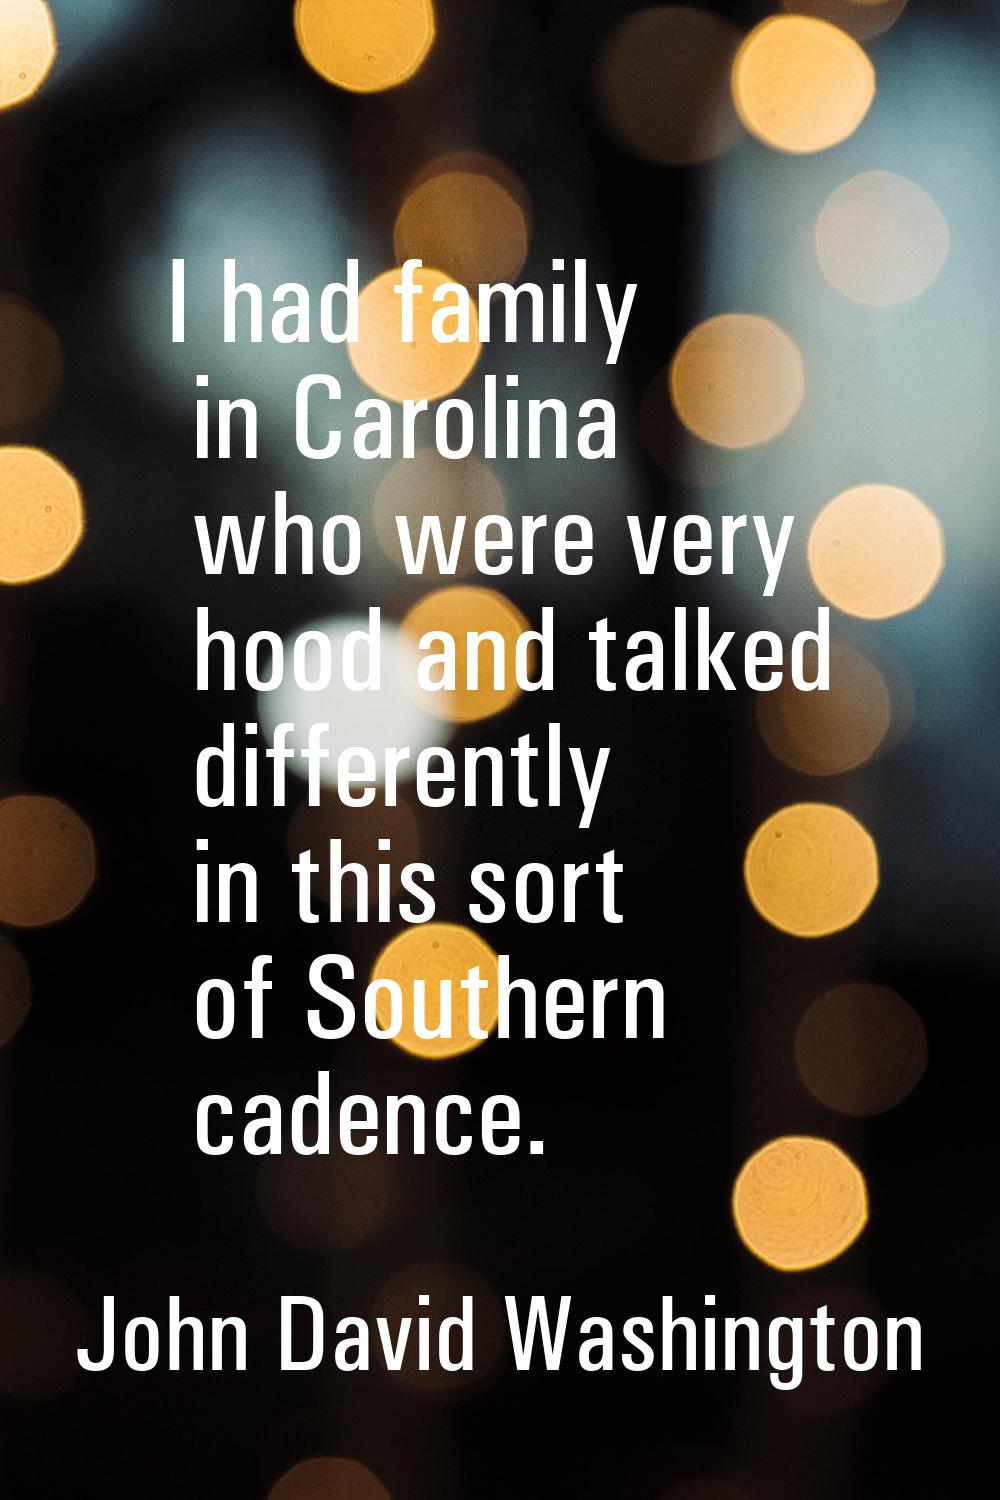 I had family in Carolina who were very hood and talked differently in this sort of Southern cadence